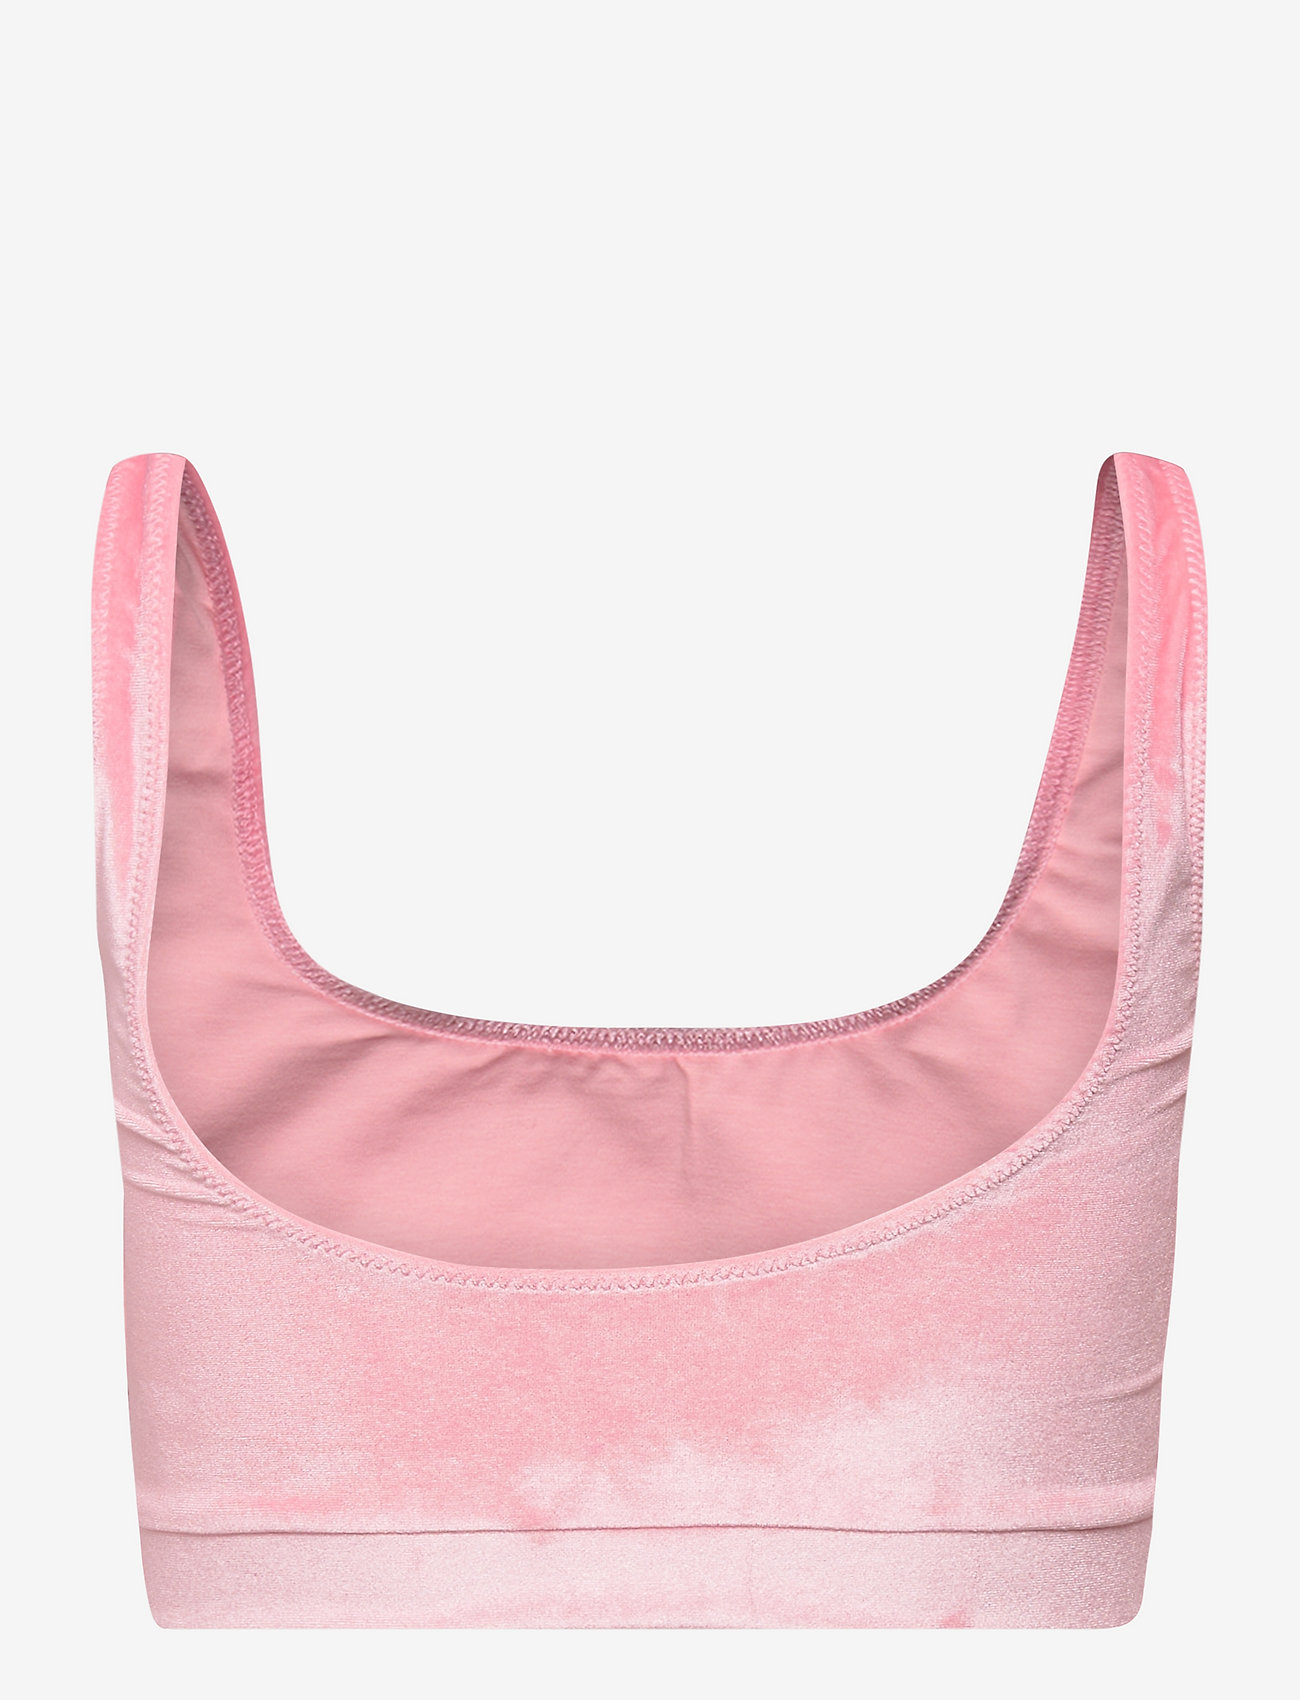 OW Collection - VENUS Top - tanktopbeha's - strawberry - 1